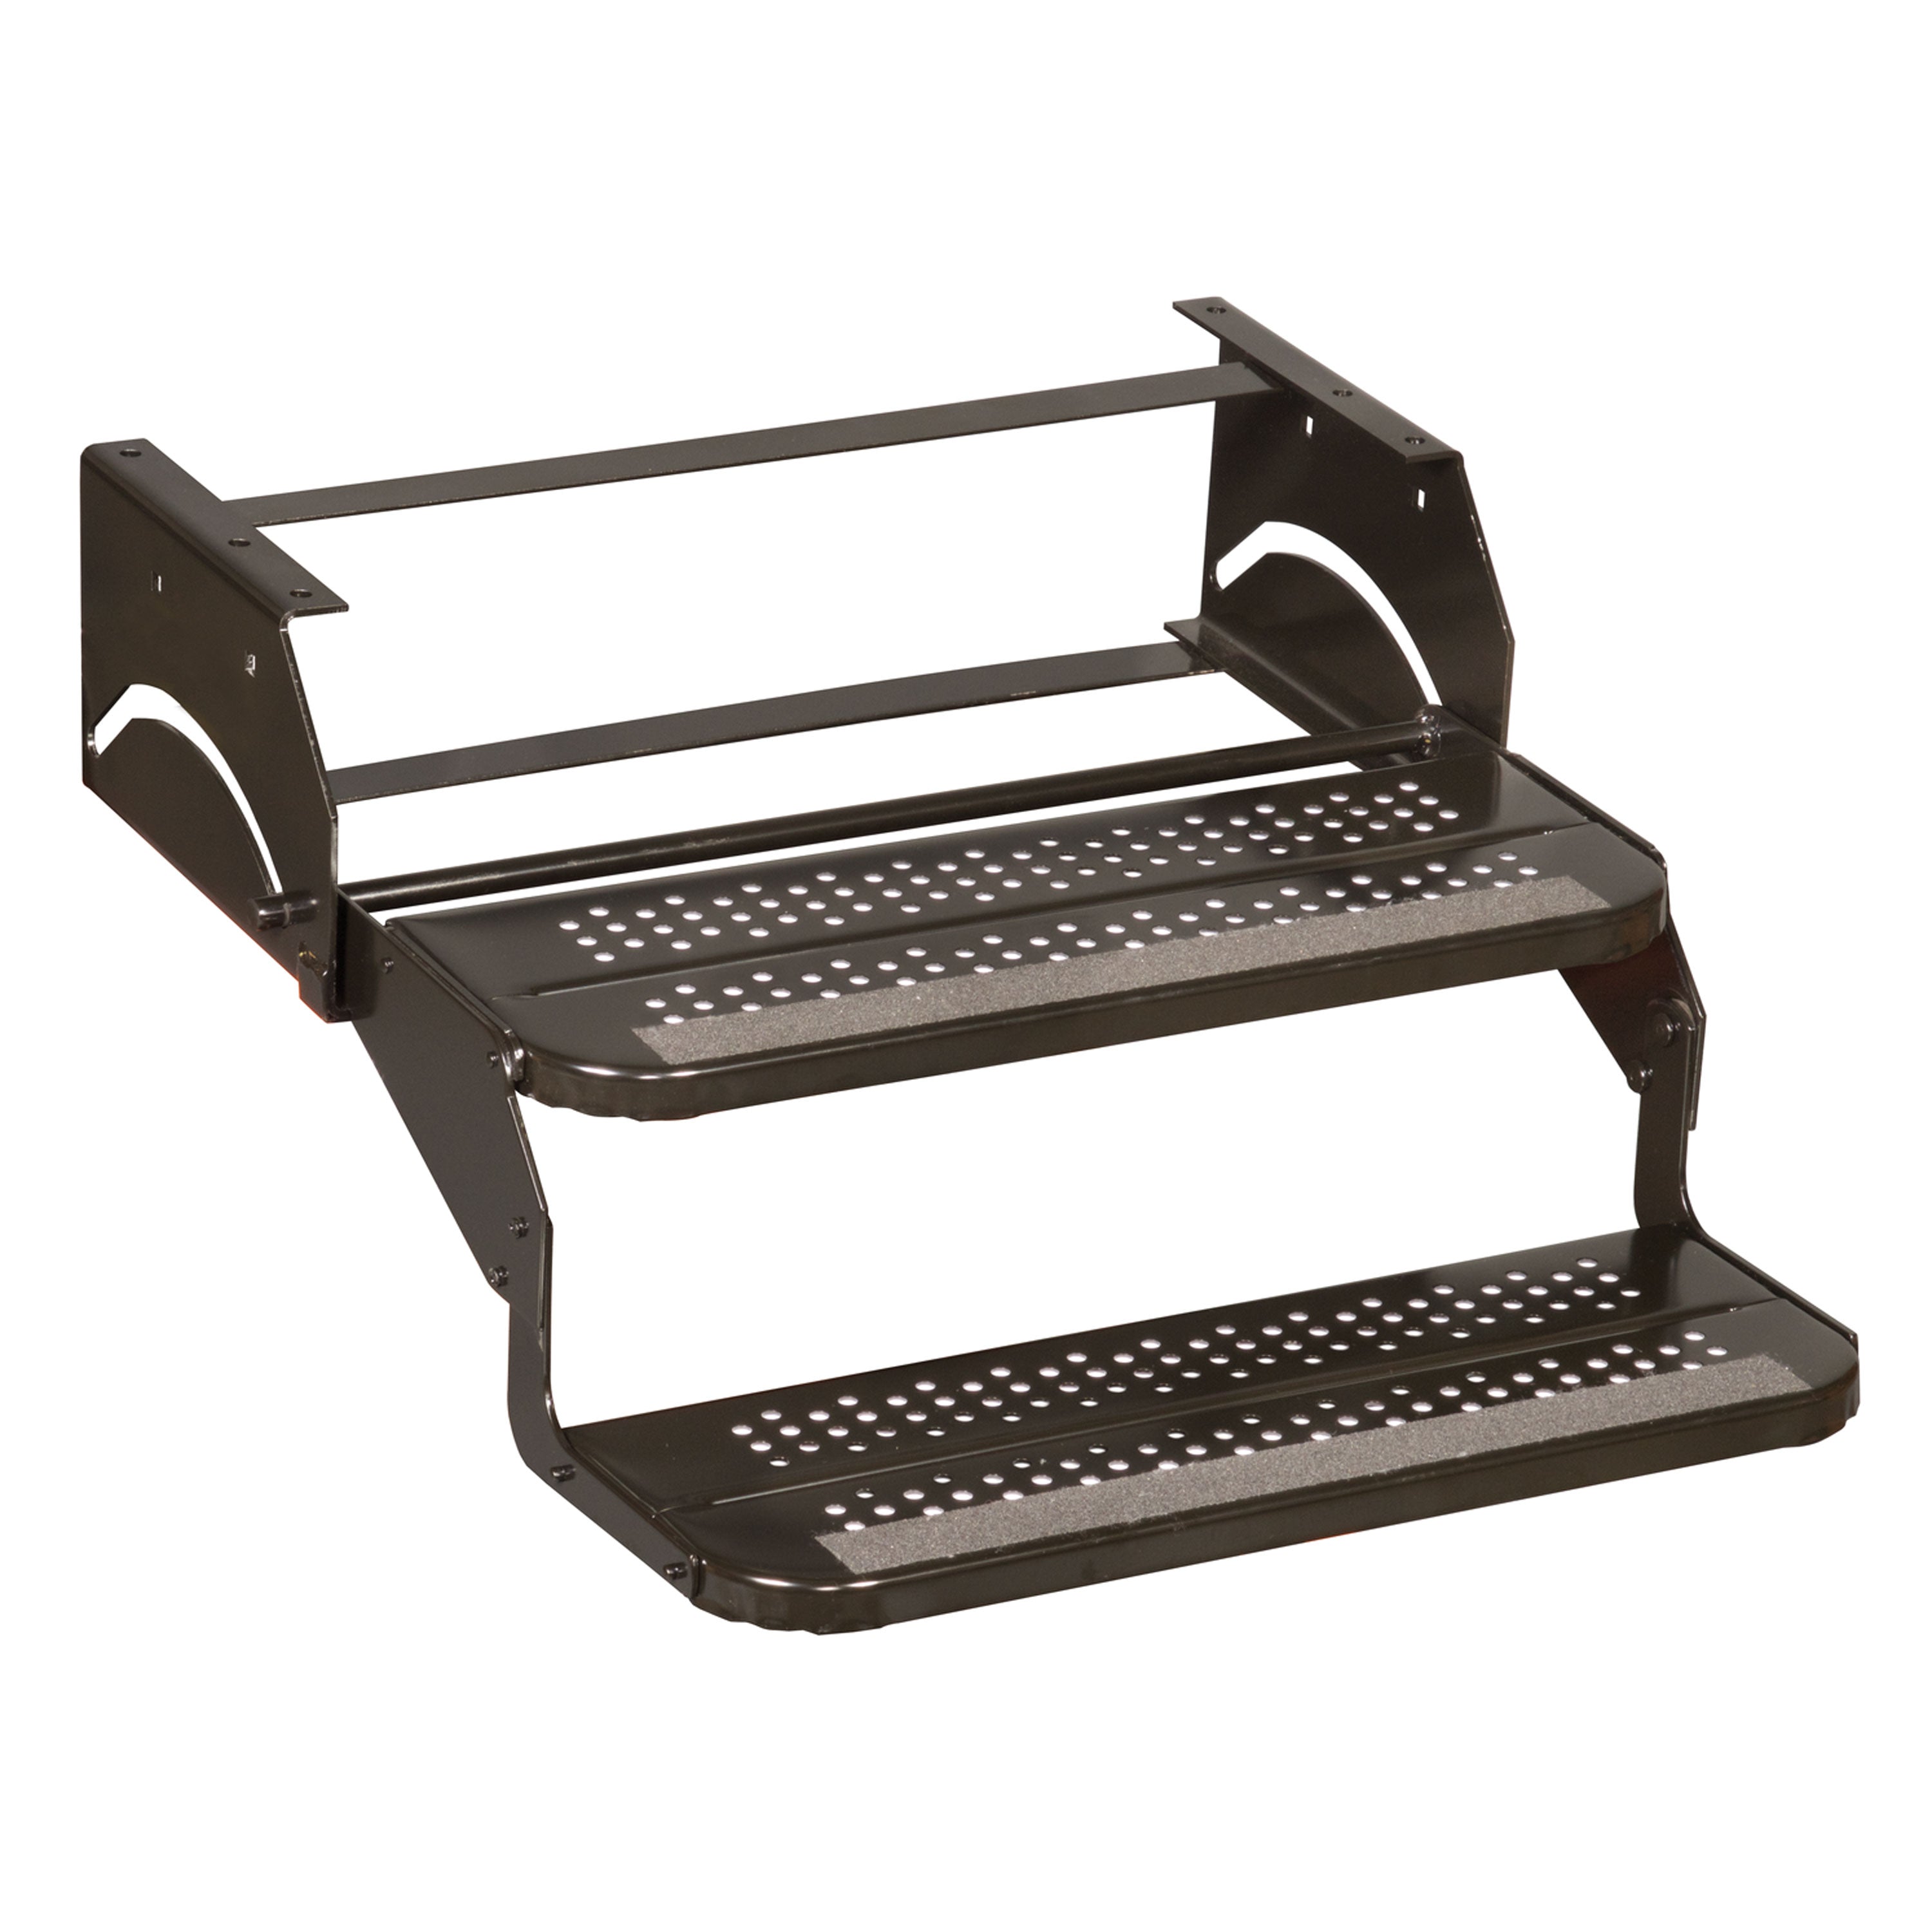 Elkhart Tool & Die 928-9 Standard Double Camper Step with 28" Wide Tread - 15.75" Drop and 9" Risers